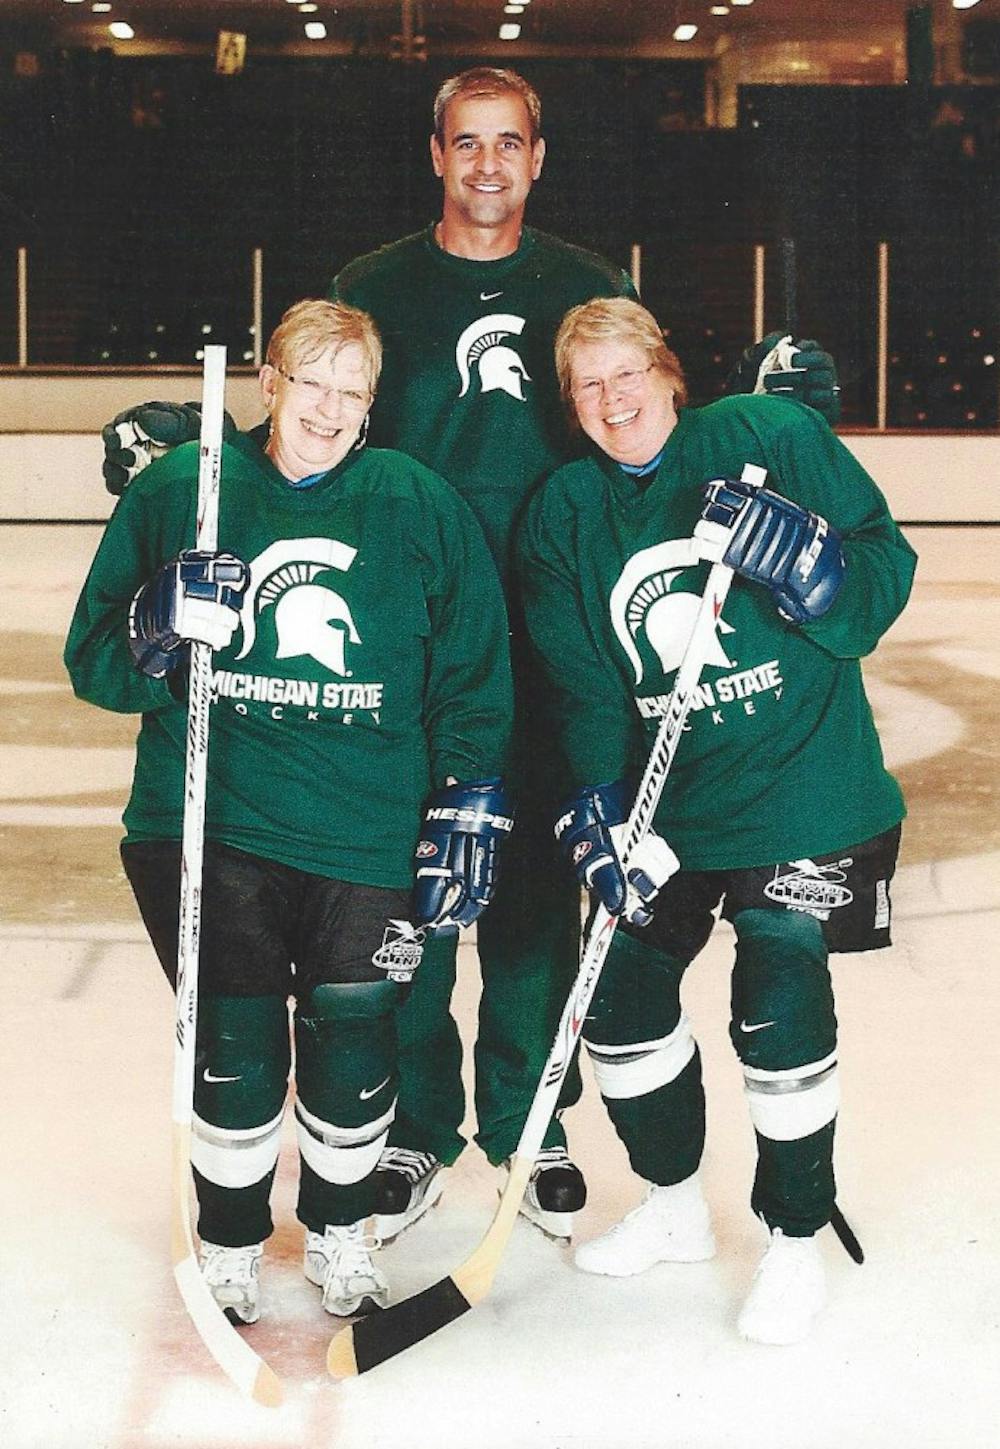 	<p><span class="caps">MSU</span> &#8220;super fan&#8221; Janeen Geisenhaver, right, and her so-called &#8220;partner in crime&#8221; Pam Echterling pose with <span class="caps">MSU</span> ice hockey coach Tom Anastos at a women&#8217;s hockey clinic last summer. Geisenhaver was named <span class="caps">MSU</span>&#8217;s super fan in a contest held by the <span class="caps">CCHA</span>.</p>